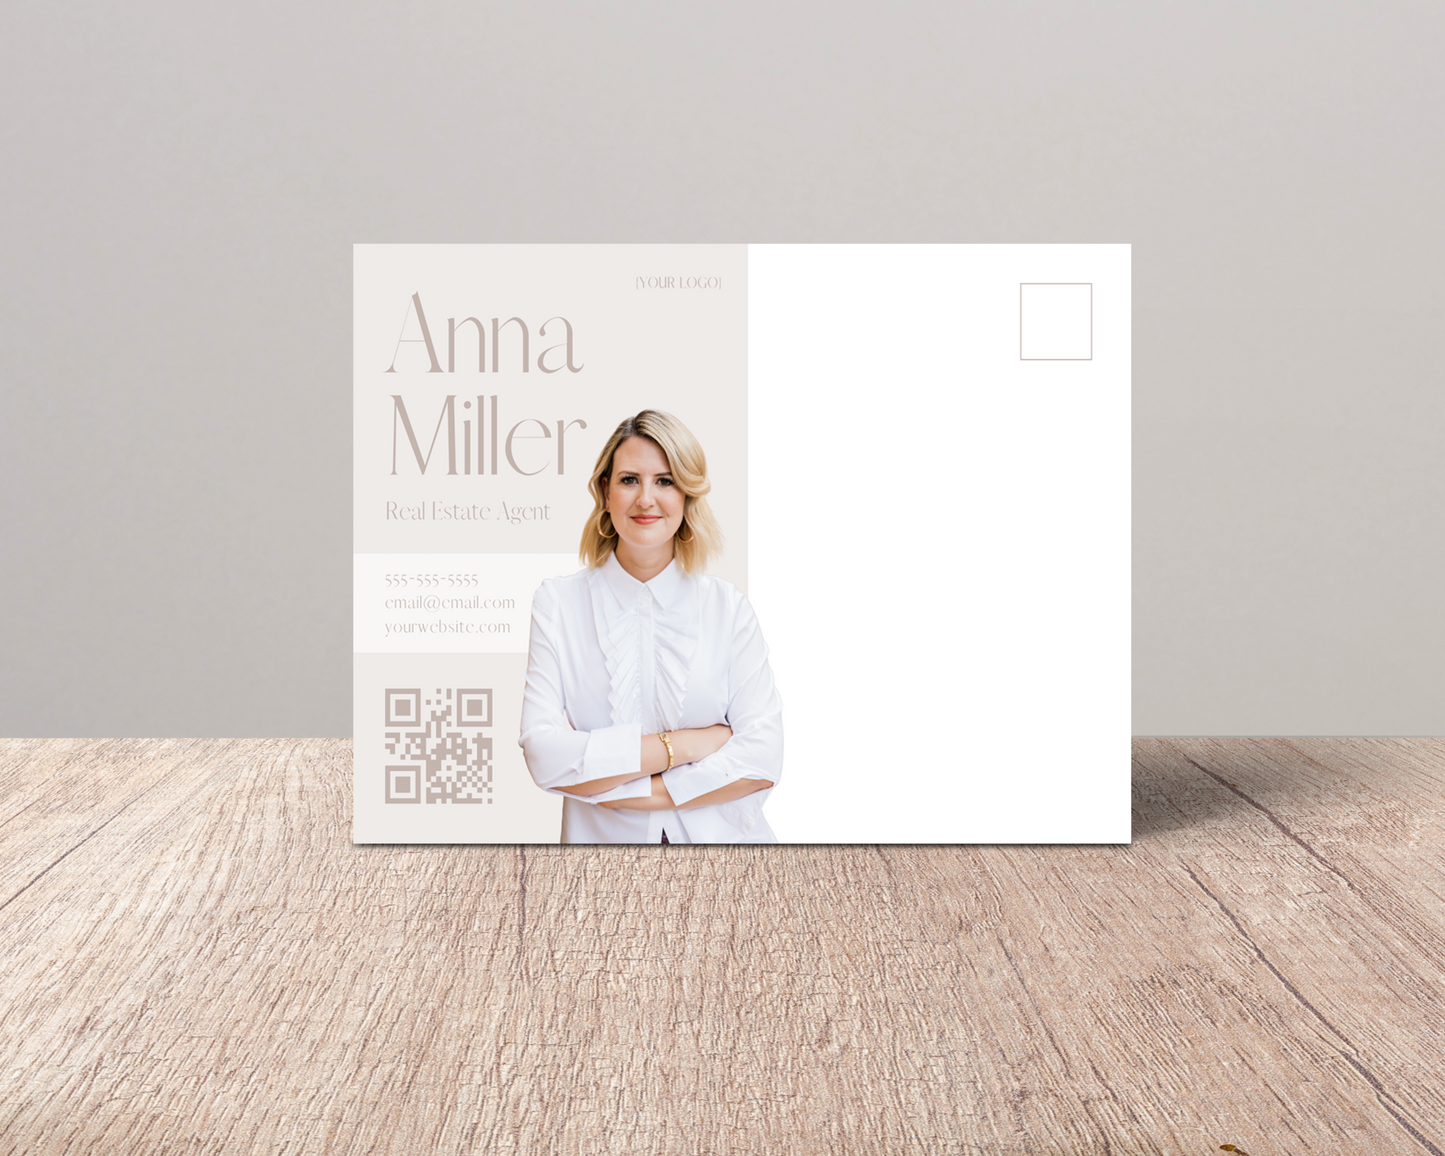 Real Estate Template – Just Sold Postcard